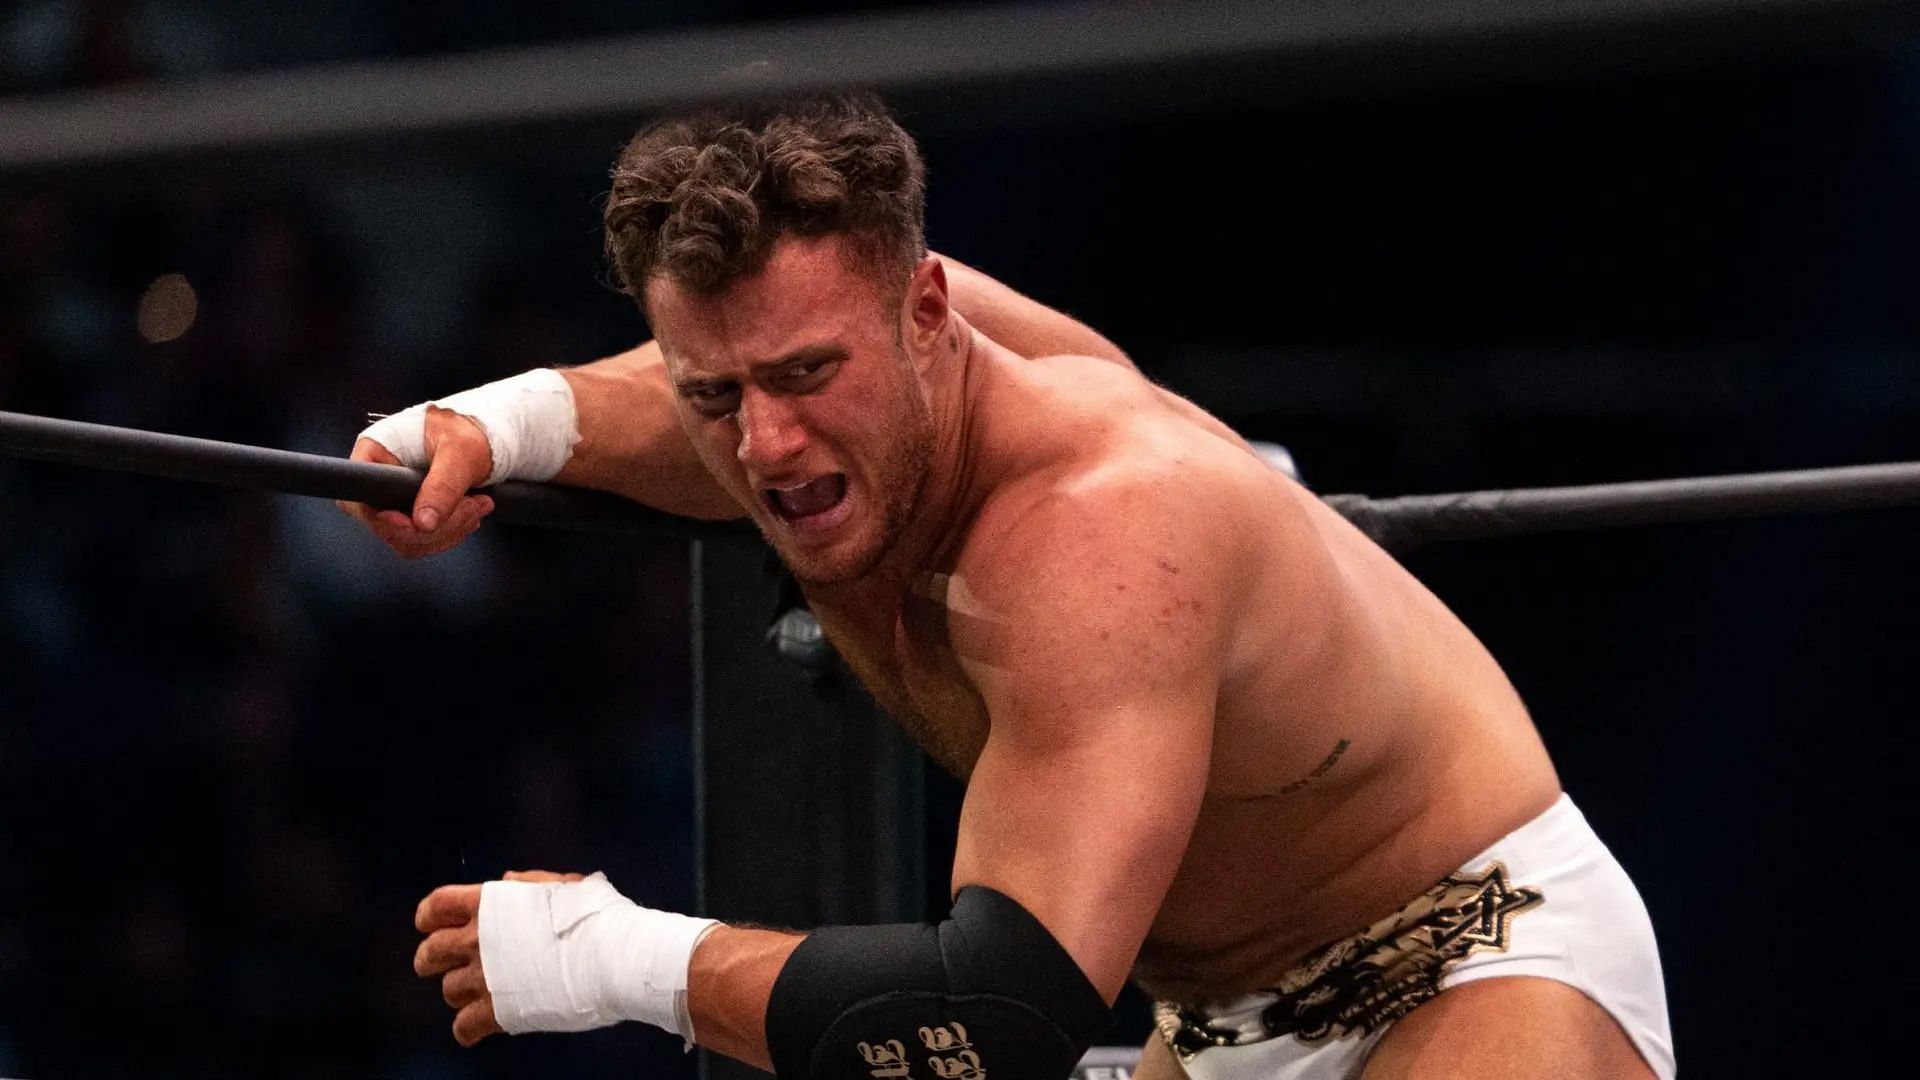 The loss of MJF might be a major blow to AEW